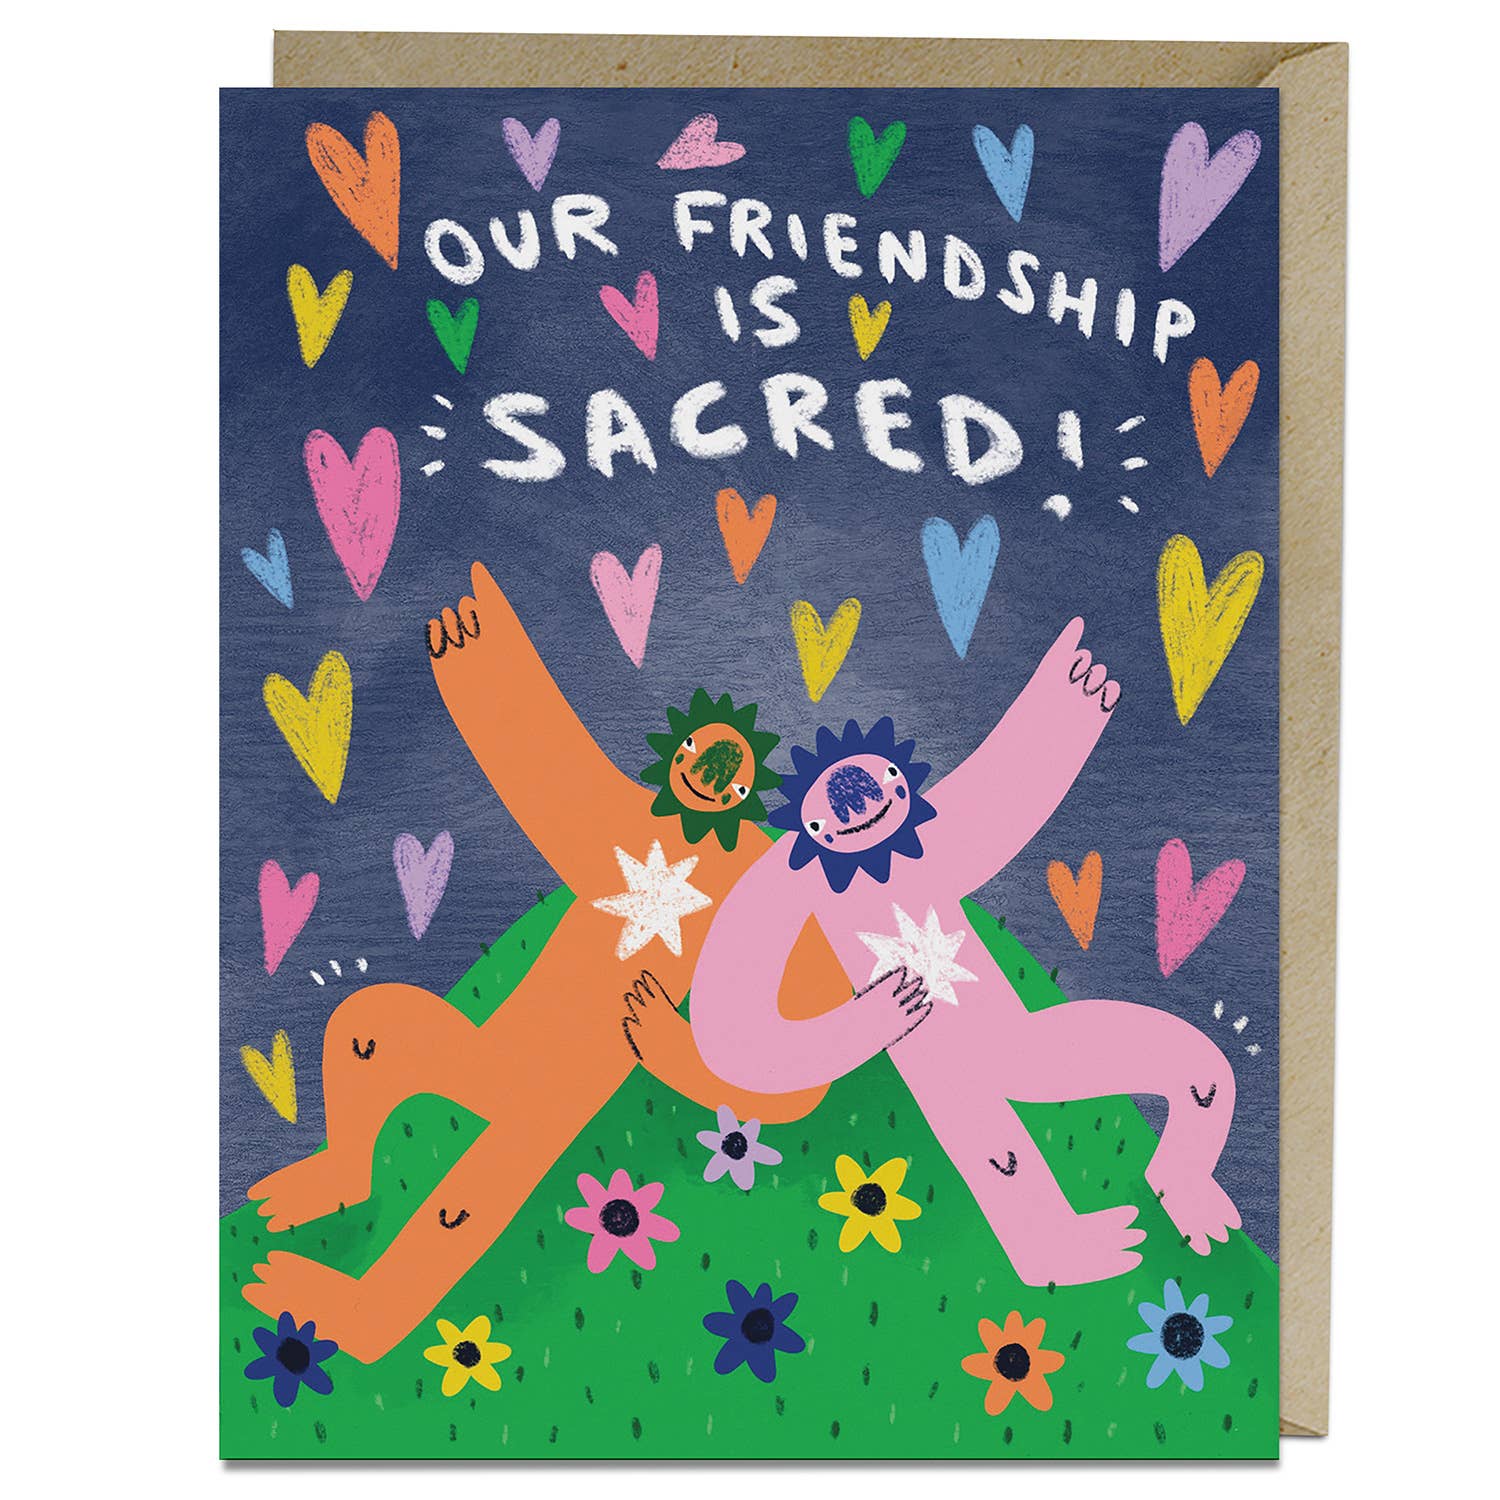 Our Friendship is Sacred | Card | Barry Lee - Spiral Circle